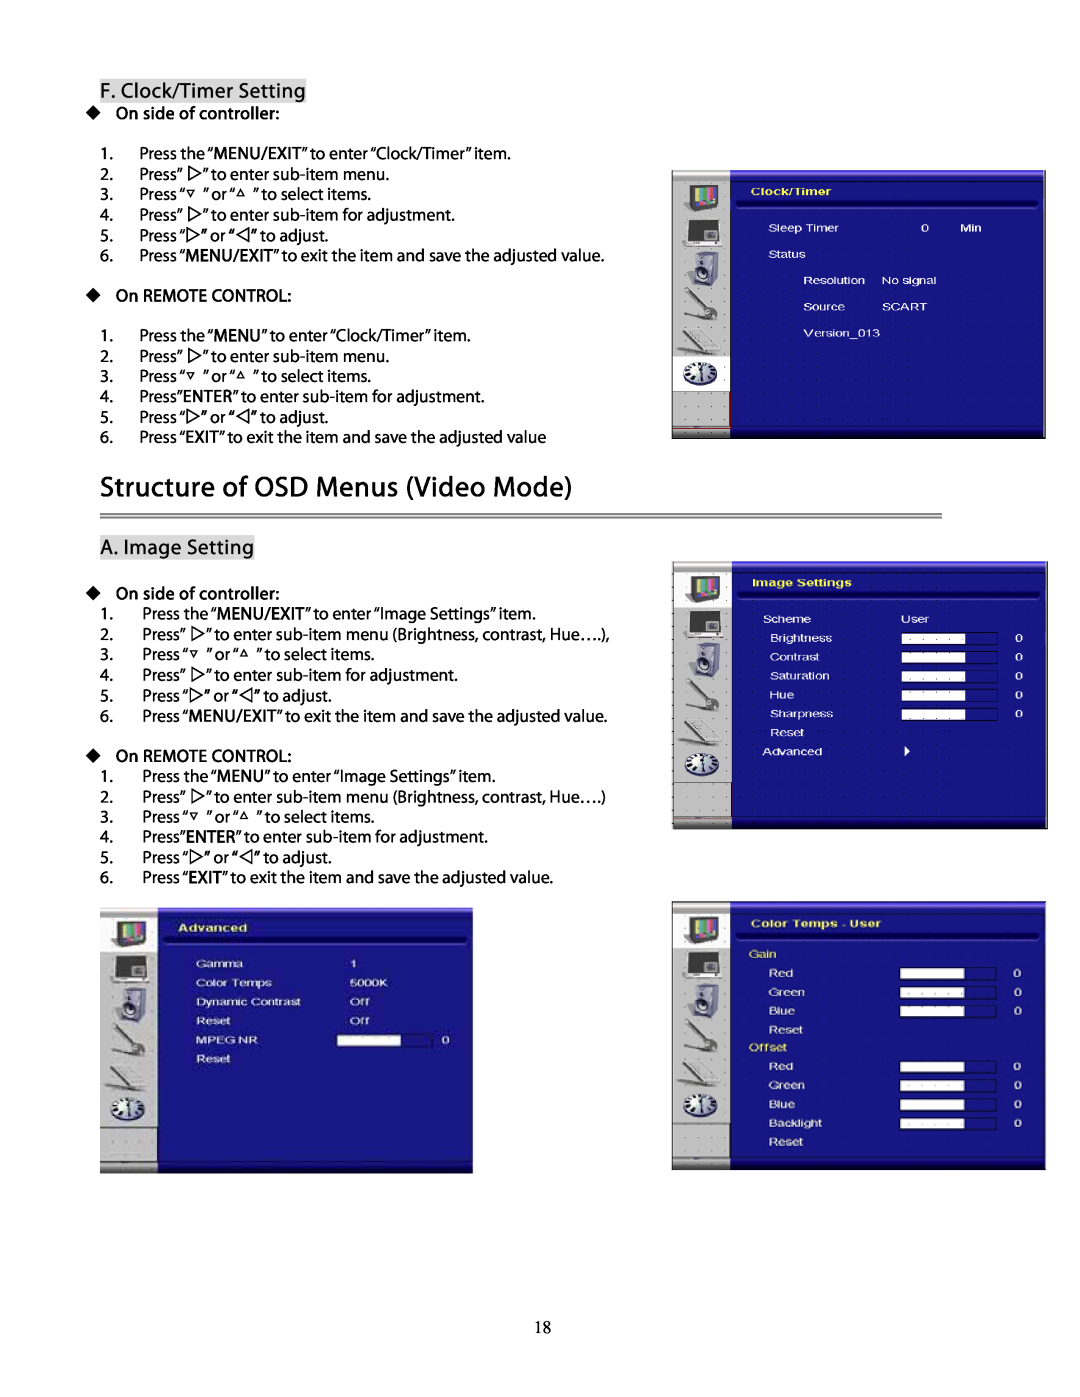 Planar PD370 Structure of OSD Menus Video Mode, F. Clock/Timer Setting, A. Image Setting, ‹ On side of controller 